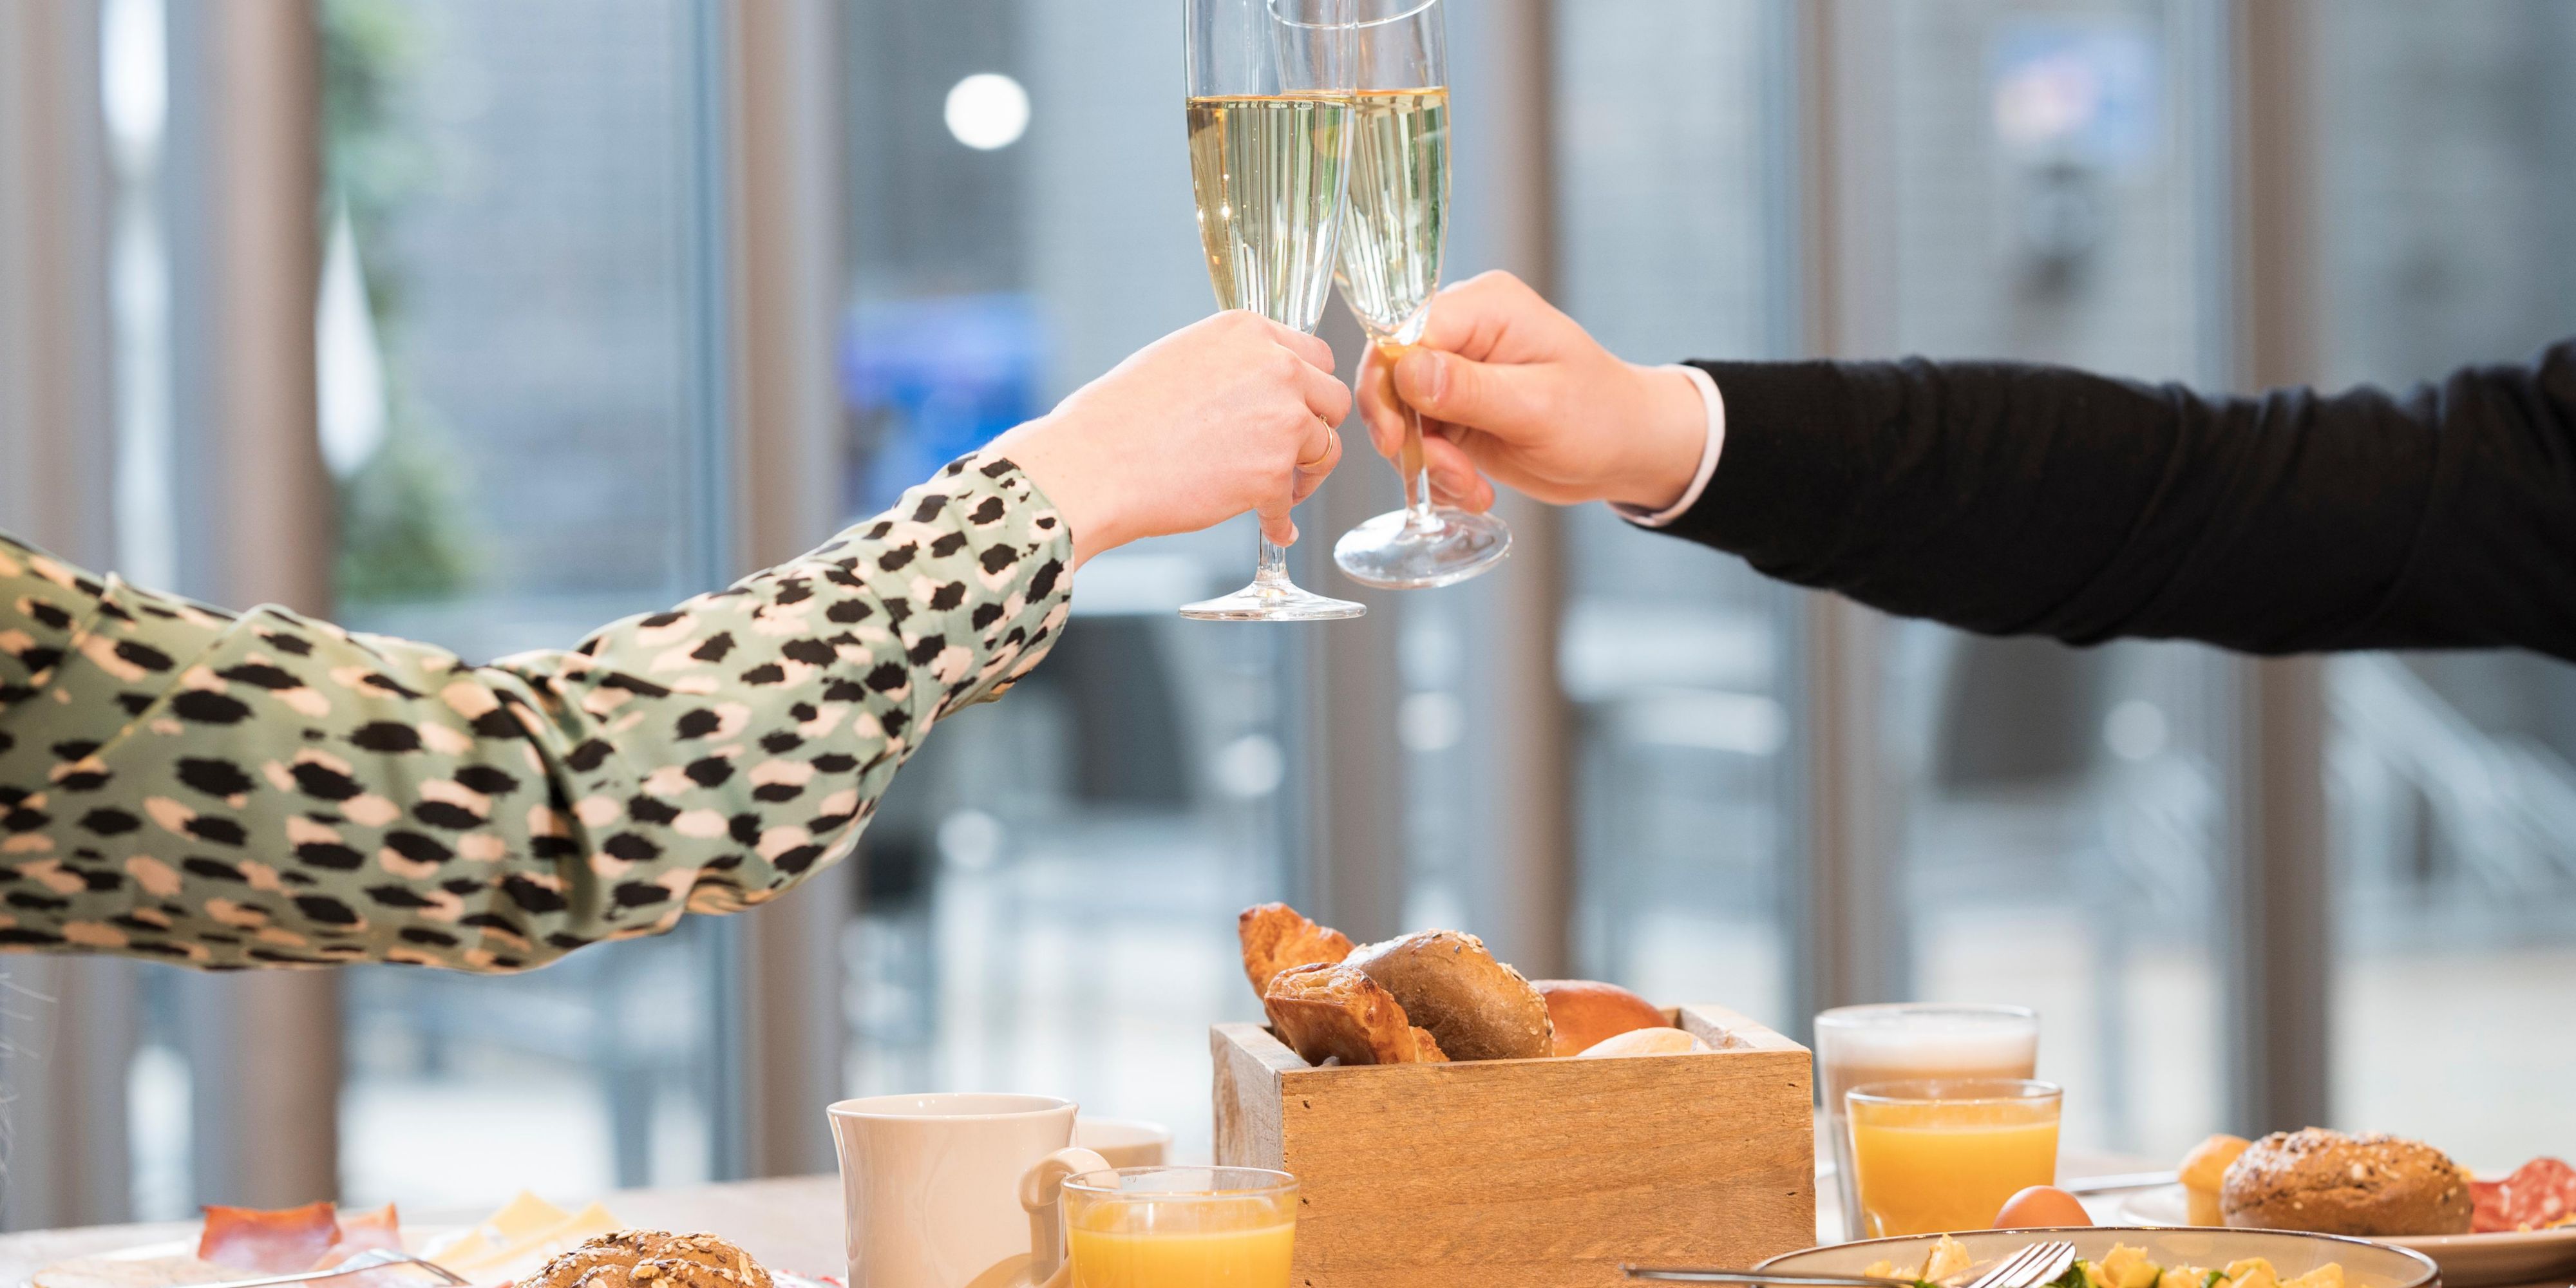 We like to spoil our guests during their weekend break. Treat yourself to a glass of bubbles to start your day well. We offer complimentary bubbles at breakfast during weekends and school holidays. Enjoy it!